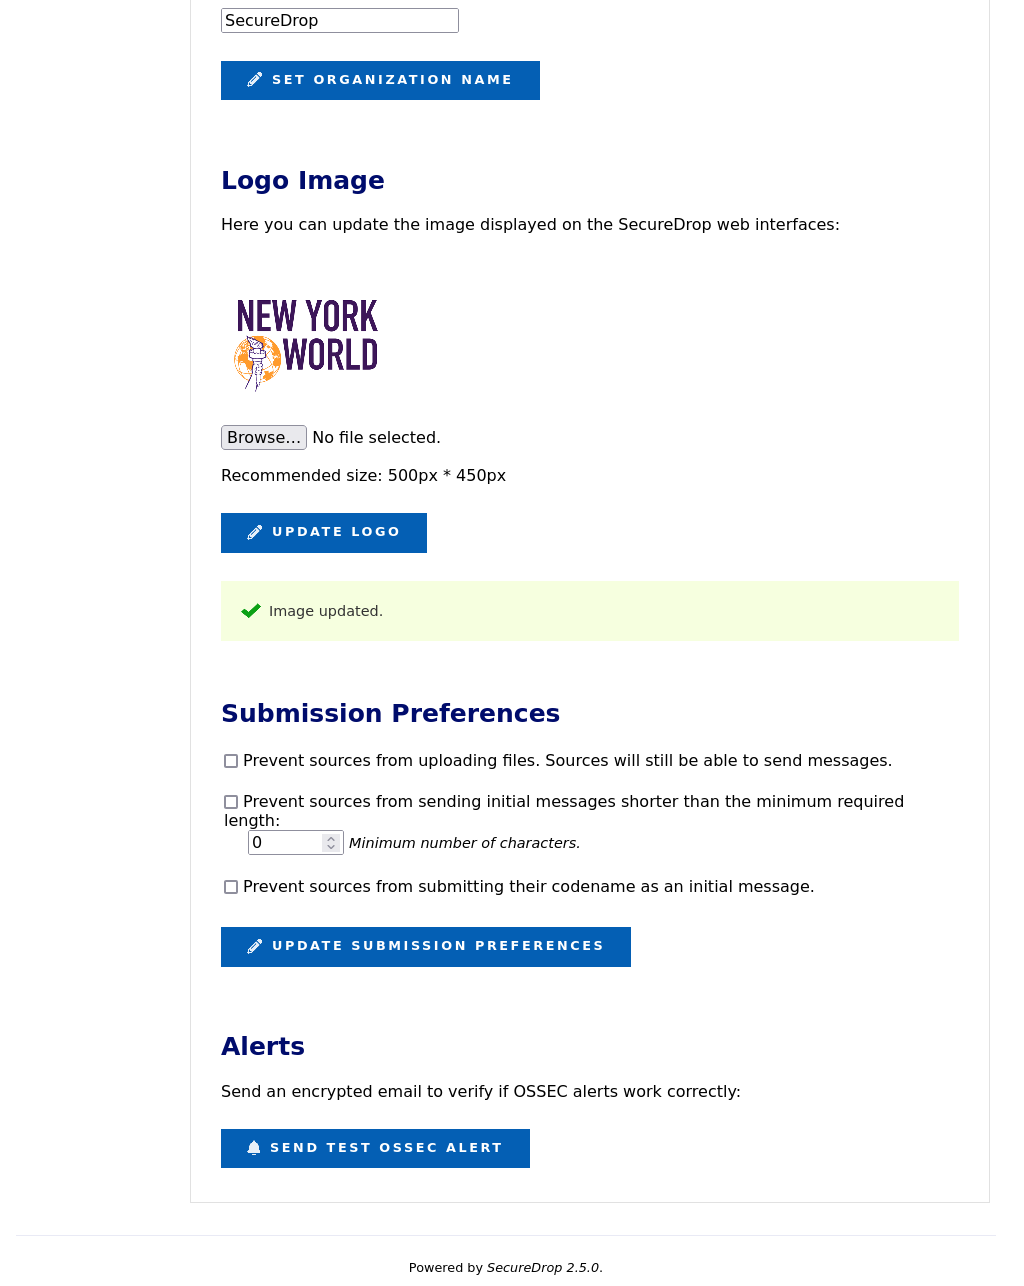 The Instance Configuration form displays 'Image updated' after the logo was updated successfully.